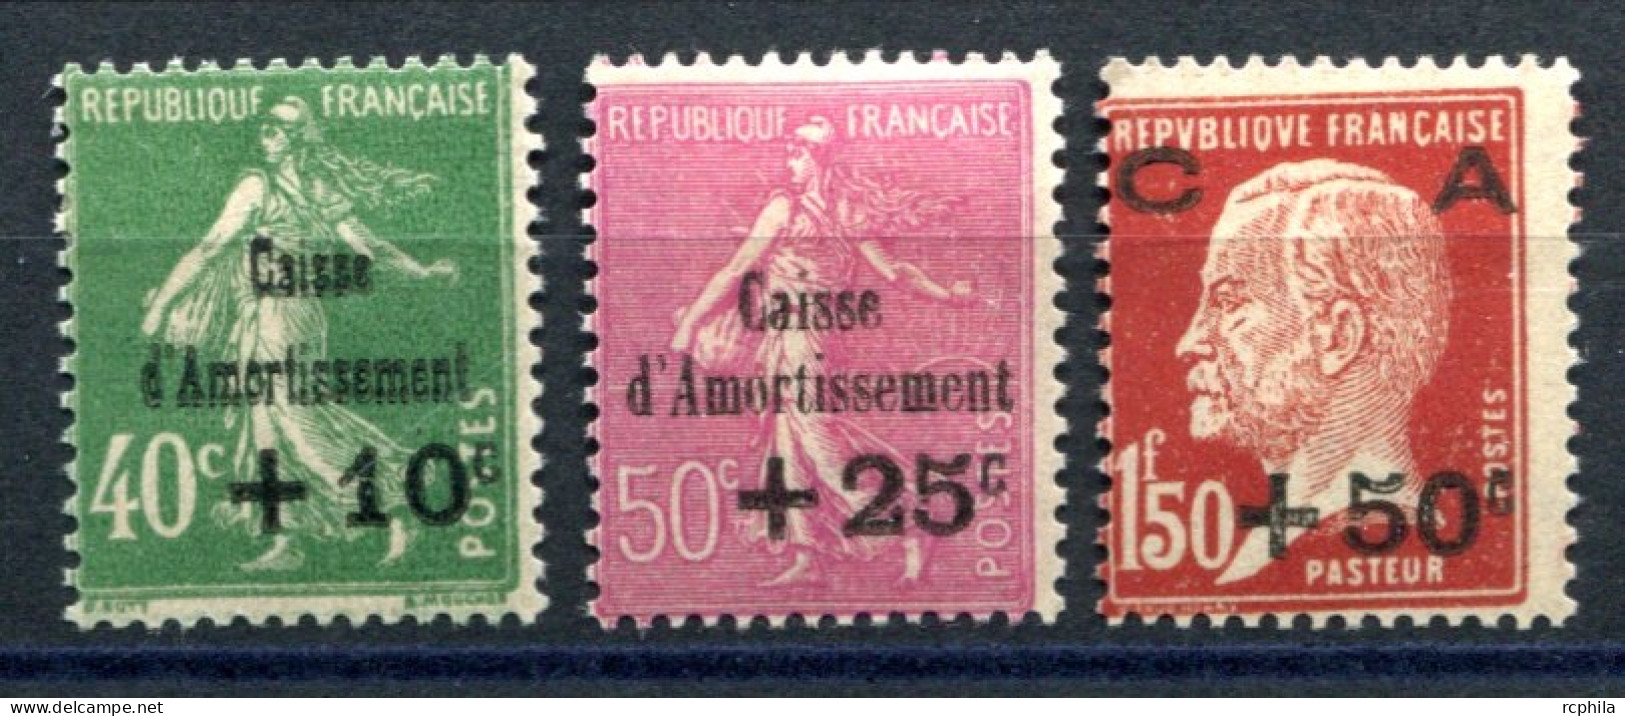 RC 27574 FRANCE COTE 120€ N° 253 / 255 SERIE CAISSE D'AMORTISSEMENT NEUF * MN TB - Ungebraucht